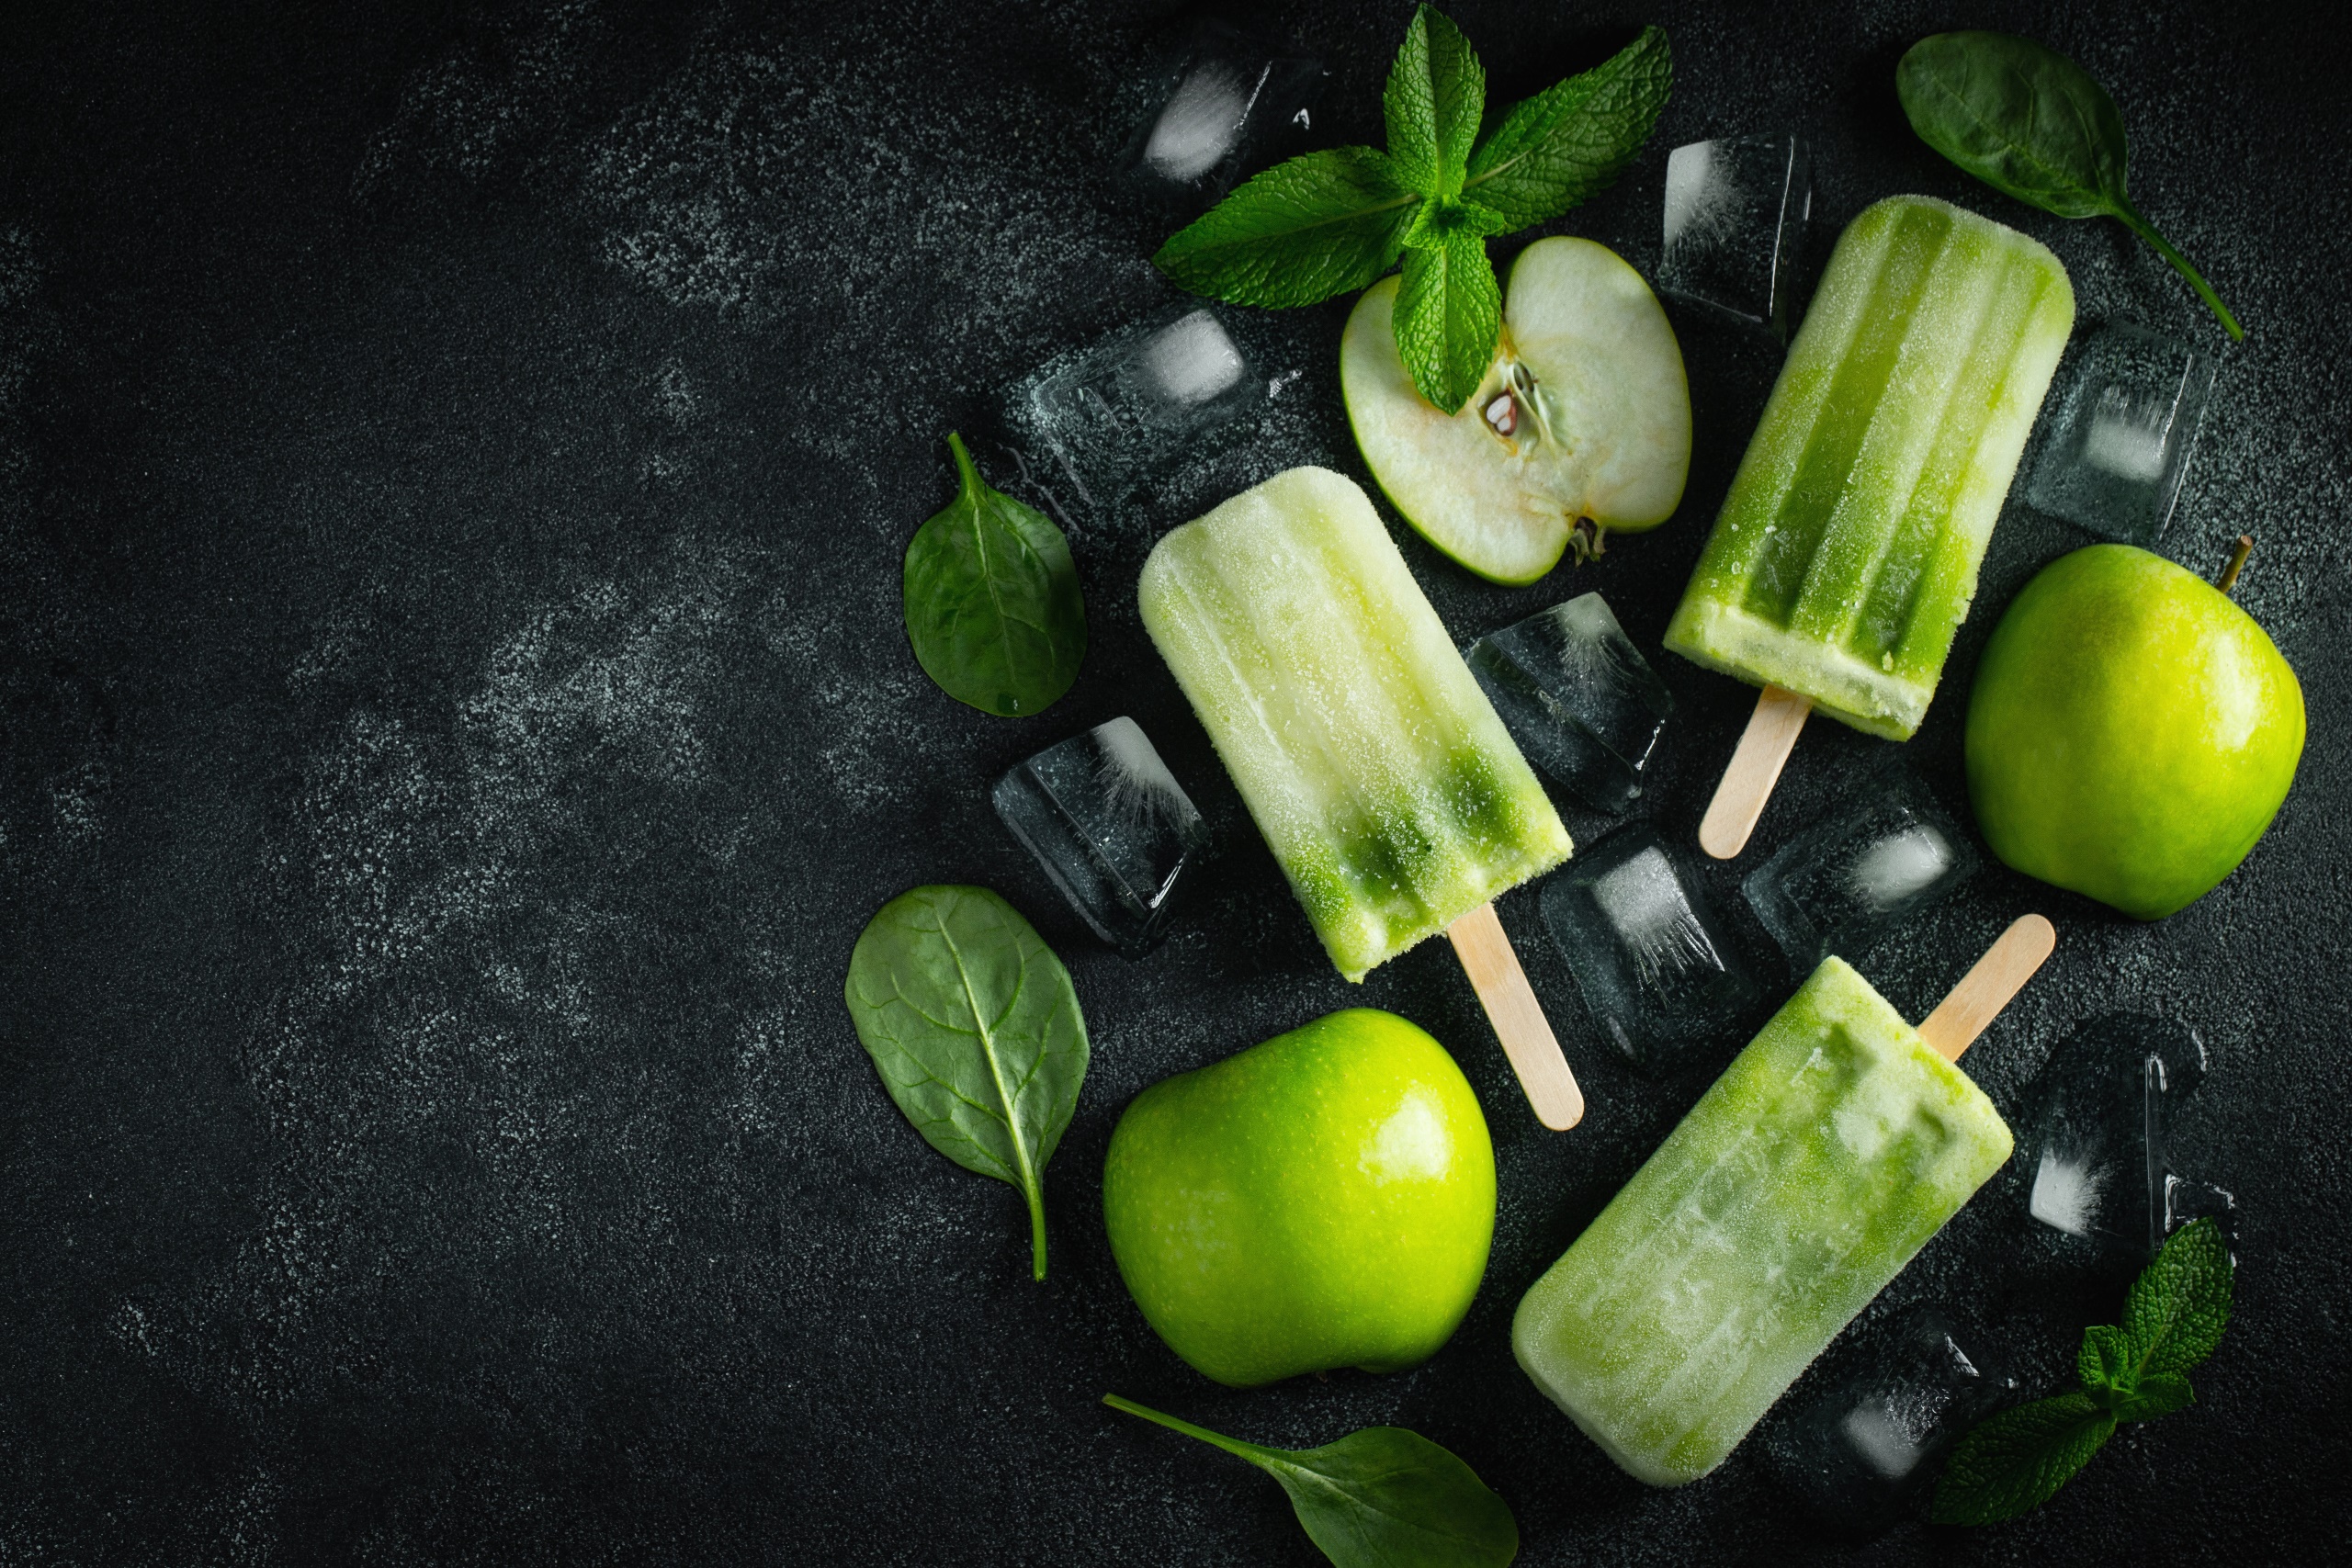 Popsicle Food Fruit Apples Ice Ice Cubes Mint Leaves Basil Green Spinach Top View Black Background 2560x1707